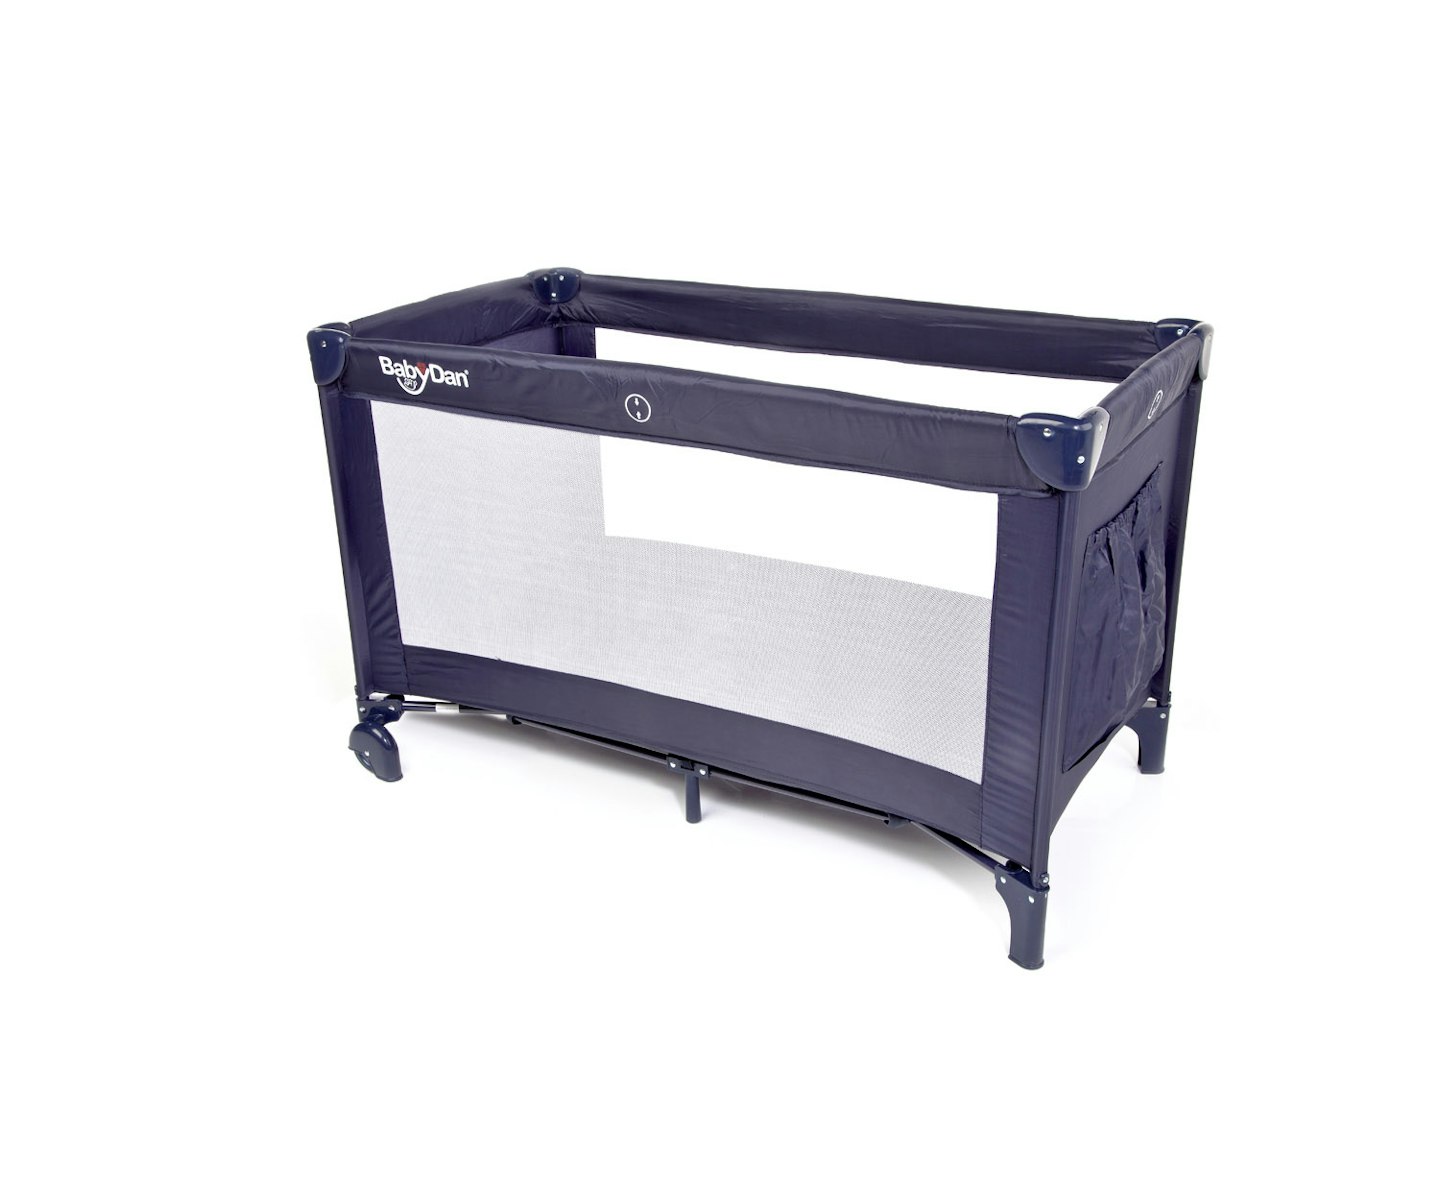 baby dan travel cot extra large